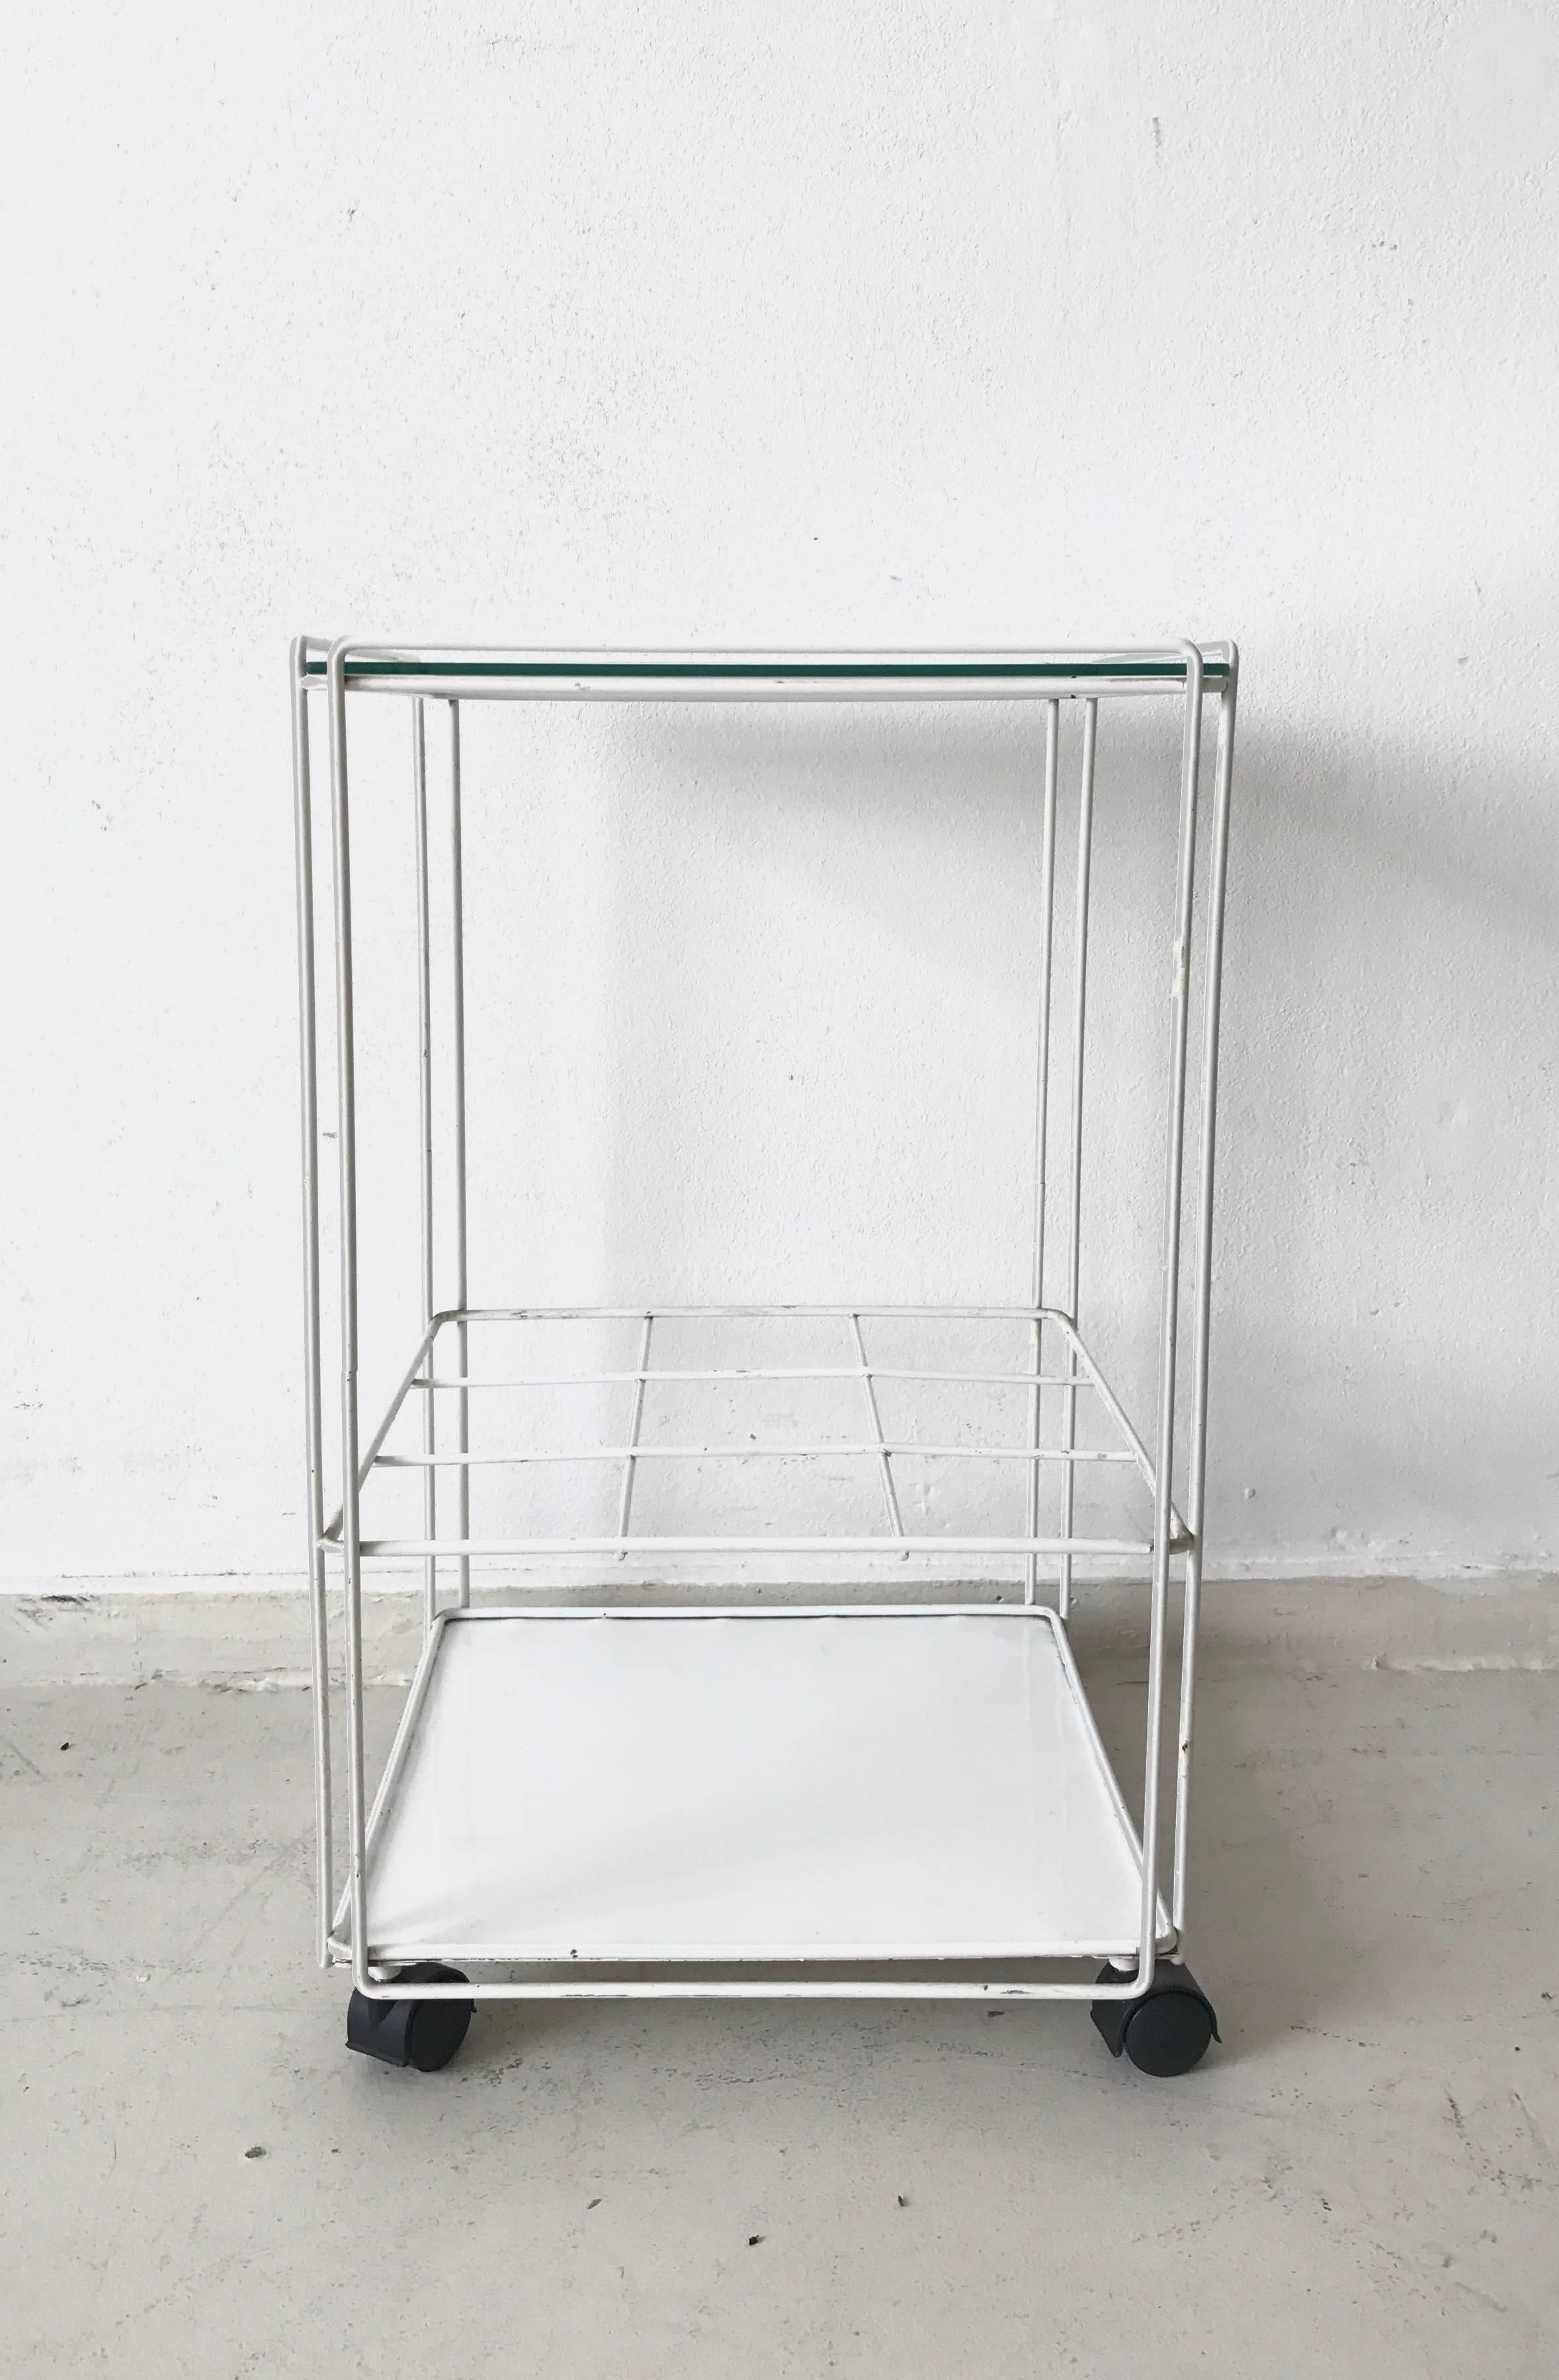 Industrial modern vintage bar cart attributed to the French designer, Max Sauze. It comes in a white enameled metal wire frame with a glass top. Super versatile and minimal. Could double as a side table or office cart. In original condition with